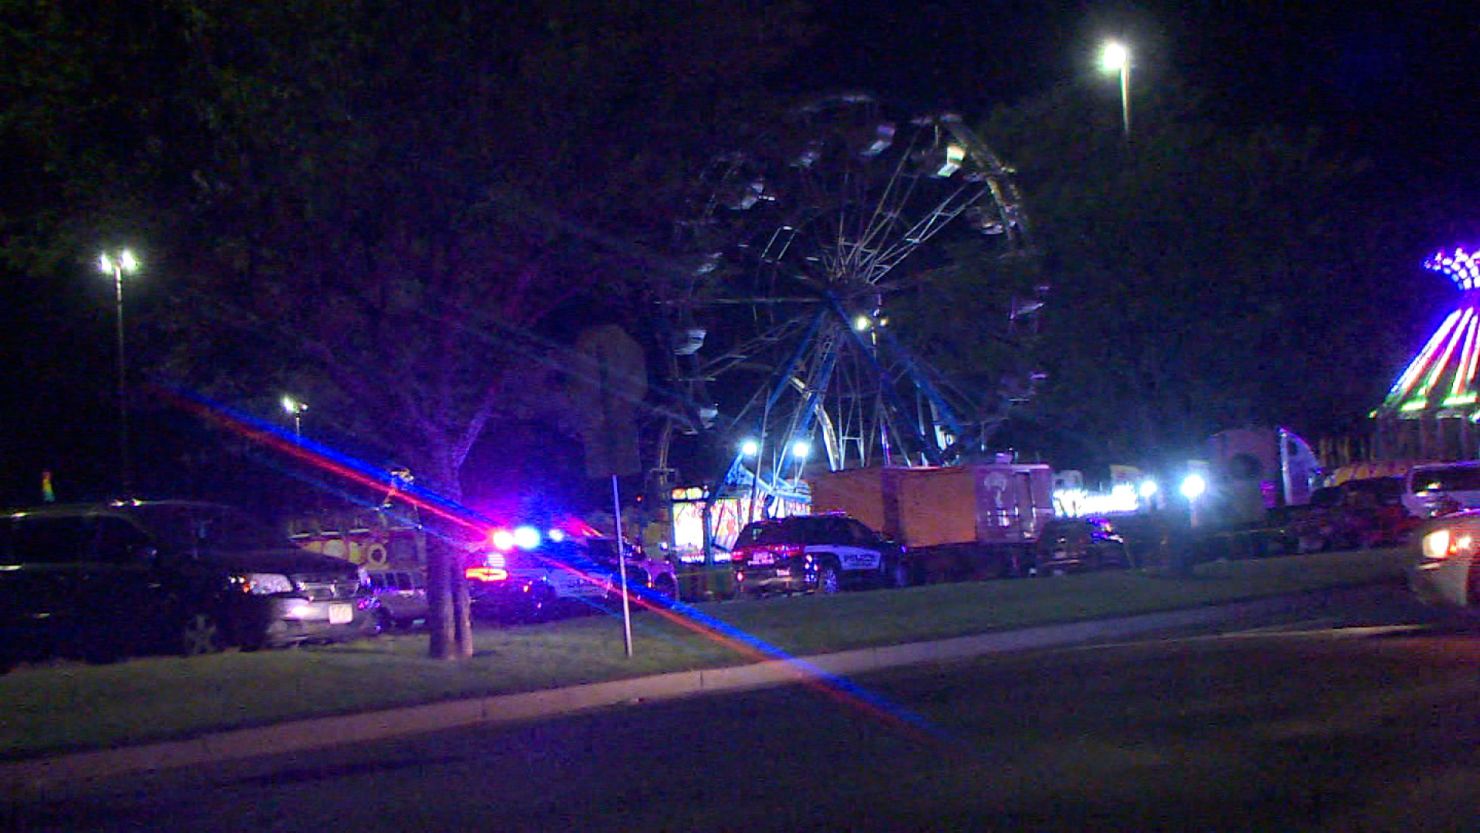 The first shooting happened at a mall carnival.